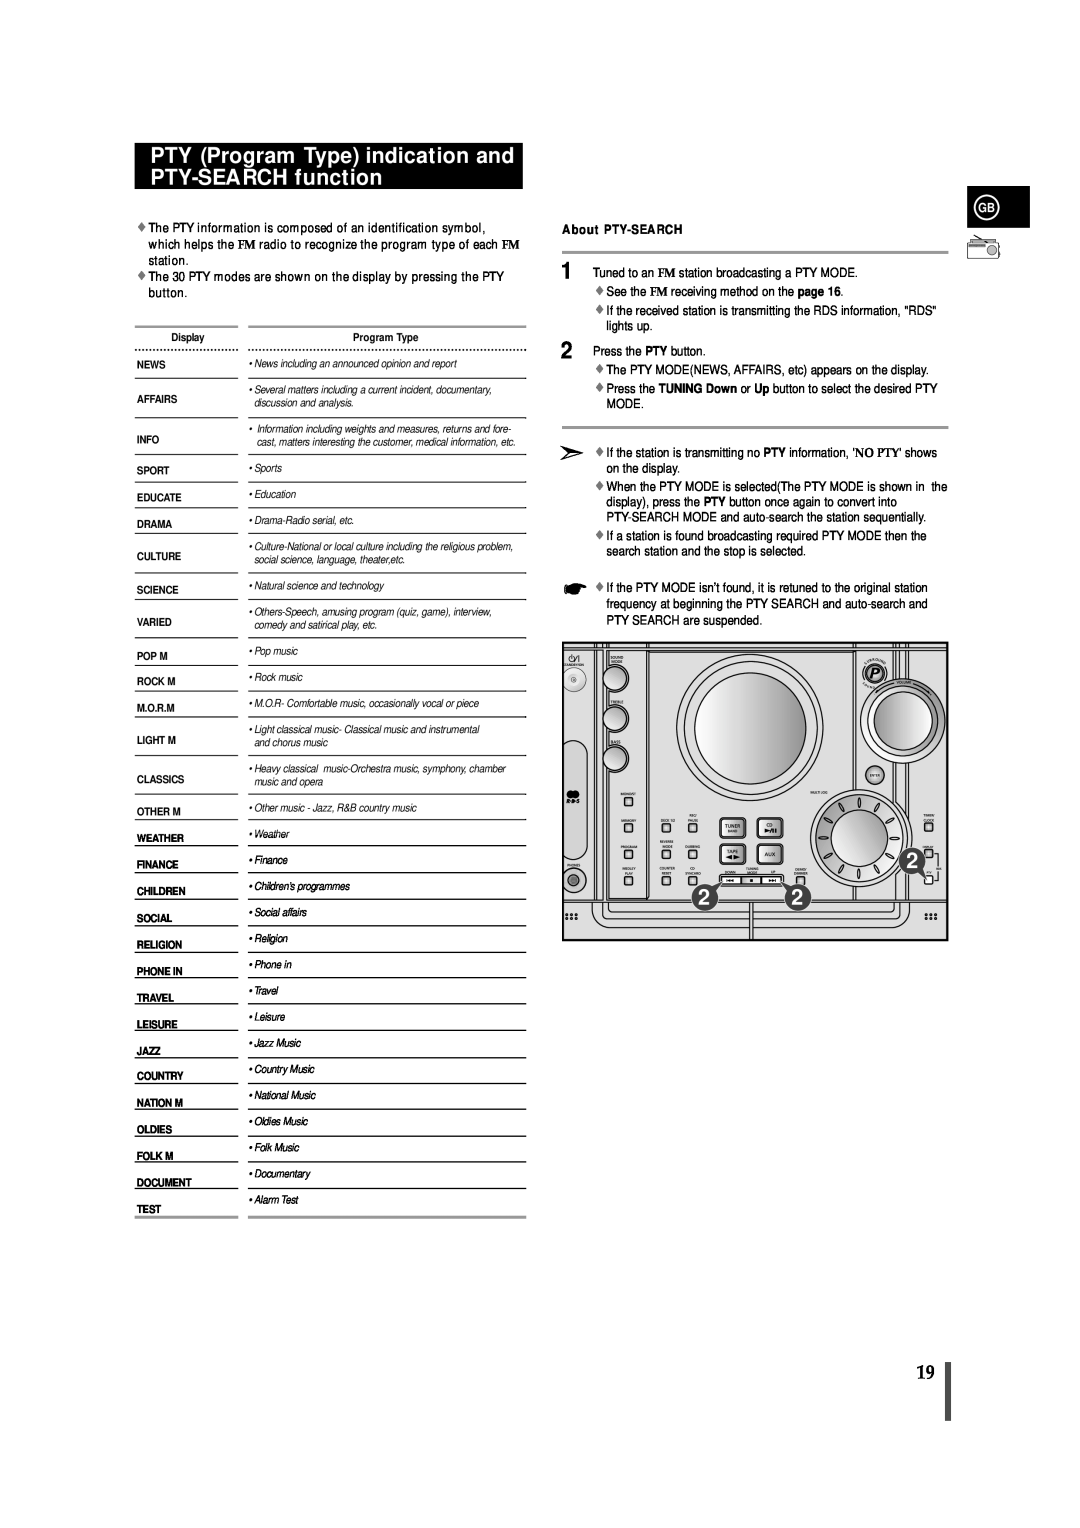 Samsung MAXZJ650RH/ELS, MAXZJ650RH/EDC manual PTY Program Type indication and PTY-SEARCH function, About PTY-SEARCH 